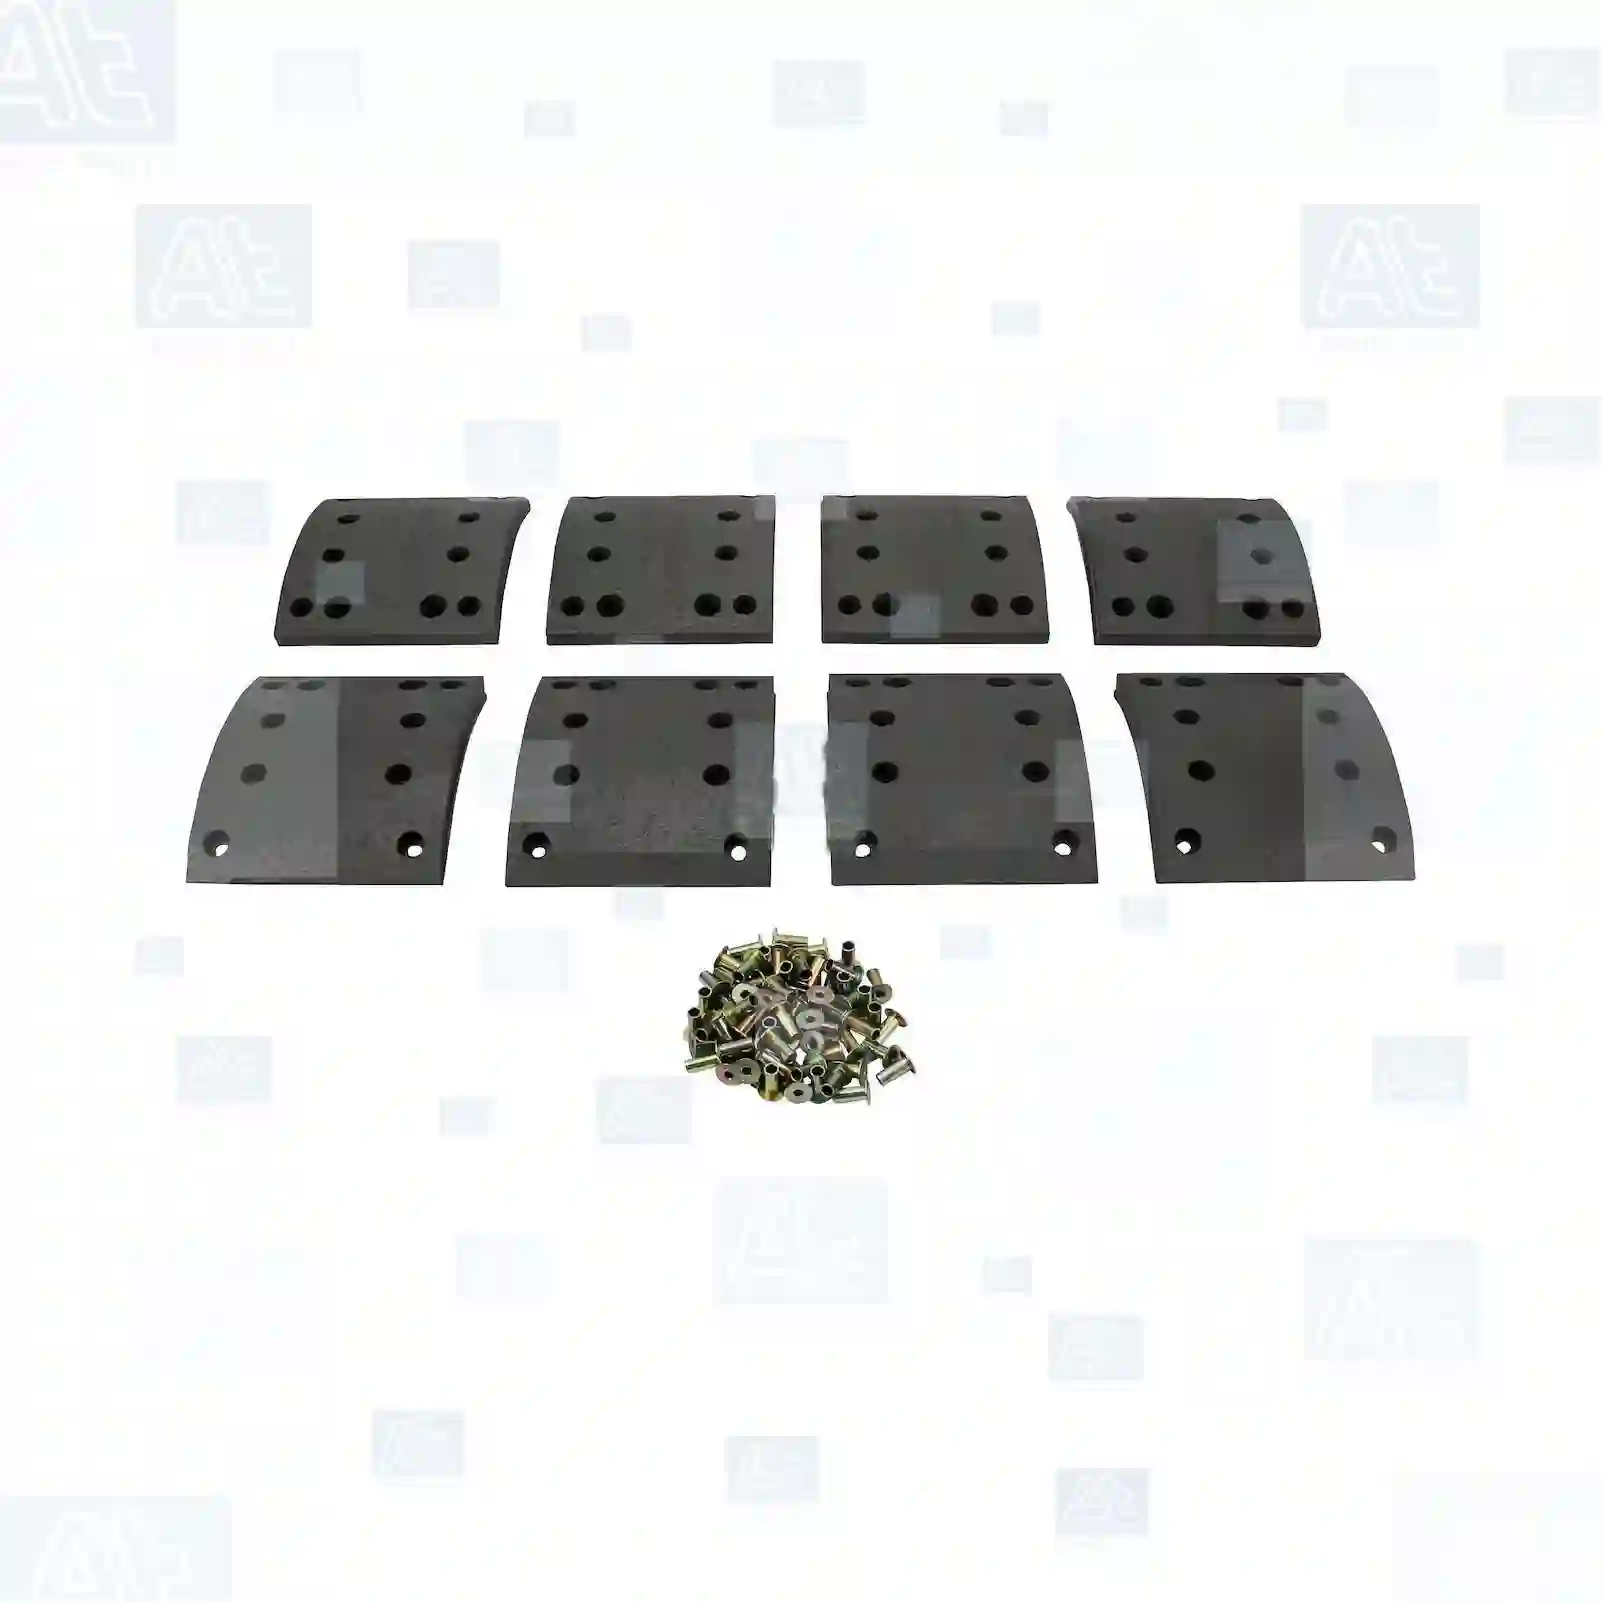 Drum brake lining kit, axle kit - oversize, 77713866, 81502200148, 81502200334, 81502200337, 81502200418, 81502200439, 81502200504, 81502200517, 81502200519, 81502200544, 81502200606, 81502200629, 81502200630, 81502200641, 81502200642, 81502200650, 81502200651, 81502200684, 81502200701, 81502200703, 81502200705, 81502200707, 81502200709, 81502200761, 81502200766, 81502200772, 81502200929, 81502200994, 81502200996, 81502210148, 81502210160, 81502210162, 81502210214, 81502210416, 81502210435, 81502210520, 81502210639, 81502210679, 81502210803, 81502210839, 81502210902, 81502210923, 81502210943, 81502216086, 81502216094, 88502200023, 3054210010, 3454238110, 3464230310, 3464231210, 3464231510, 3464233110, 3464235810, 3464236110, 3604230410, 3604230710, 3604231910, 3814232210, 3854210010, 3854210310, 3854211010, 3854231510, 6174210110, 6174231830, 6174232011, 6174233110, 6174234810, 6174234811, 6174236810, 6214210110, 6214210510, 6214210910, 6214230111, 6524230910, 6594211310, MBLK2190, ZG50454-0008 ||  77713866 At Spare Part | Engine, Accelerator Pedal, Camshaft, Connecting Rod, Crankcase, Crankshaft, Cylinder Head, Engine Suspension Mountings, Exhaust Manifold, Exhaust Gas Recirculation, Filter Kits, Flywheel Housing, General Overhaul Kits, Engine, Intake Manifold, Oil Cleaner, Oil Cooler, Oil Filter, Oil Pump, Oil Sump, Piston & Liner, Sensor & Switch, Timing Case, Turbocharger, Cooling System, Belt Tensioner, Coolant Filter, Coolant Pipe, Corrosion Prevention Agent, Drive, Expansion Tank, Fan, Intercooler, Monitors & Gauges, Radiator, Thermostat, V-Belt / Timing belt, Water Pump, Fuel System, Electronical Injector Unit, Feed Pump, Fuel Filter, cpl., Fuel Gauge Sender,  Fuel Line, Fuel Pump, Fuel Tank, Injection Line Kit, Injection Pump, Exhaust System, Clutch & Pedal, Gearbox, Propeller Shaft, Axles, Brake System, Hubs & Wheels, Suspension, Leaf Spring, Universal Parts / Accessories, Steering, Electrical System, Cabin Drum brake lining kit, axle kit - oversize, 77713866, 81502200148, 81502200334, 81502200337, 81502200418, 81502200439, 81502200504, 81502200517, 81502200519, 81502200544, 81502200606, 81502200629, 81502200630, 81502200641, 81502200642, 81502200650, 81502200651, 81502200684, 81502200701, 81502200703, 81502200705, 81502200707, 81502200709, 81502200761, 81502200766, 81502200772, 81502200929, 81502200994, 81502200996, 81502210148, 81502210160, 81502210162, 81502210214, 81502210416, 81502210435, 81502210520, 81502210639, 81502210679, 81502210803, 81502210839, 81502210902, 81502210923, 81502210943, 81502216086, 81502216094, 88502200023, 3054210010, 3454238110, 3464230310, 3464231210, 3464231510, 3464233110, 3464235810, 3464236110, 3604230410, 3604230710, 3604231910, 3814232210, 3854210010, 3854210310, 3854211010, 3854231510, 6174210110, 6174231830, 6174232011, 6174233110, 6174234810, 6174234811, 6174236810, 6214210110, 6214210510, 6214210910, 6214230111, 6524230910, 6594211310, MBLK2190, ZG50454-0008 ||  77713866 At Spare Part | Engine, Accelerator Pedal, Camshaft, Connecting Rod, Crankcase, Crankshaft, Cylinder Head, Engine Suspension Mountings, Exhaust Manifold, Exhaust Gas Recirculation, Filter Kits, Flywheel Housing, General Overhaul Kits, Engine, Intake Manifold, Oil Cleaner, Oil Cooler, Oil Filter, Oil Pump, Oil Sump, Piston & Liner, Sensor & Switch, Timing Case, Turbocharger, Cooling System, Belt Tensioner, Coolant Filter, Coolant Pipe, Corrosion Prevention Agent, Drive, Expansion Tank, Fan, Intercooler, Monitors & Gauges, Radiator, Thermostat, V-Belt / Timing belt, Water Pump, Fuel System, Electronical Injector Unit, Feed Pump, Fuel Filter, cpl., Fuel Gauge Sender,  Fuel Line, Fuel Pump, Fuel Tank, Injection Line Kit, Injection Pump, Exhaust System, Clutch & Pedal, Gearbox, Propeller Shaft, Axles, Brake System, Hubs & Wheels, Suspension, Leaf Spring, Universal Parts / Accessories, Steering, Electrical System, Cabin